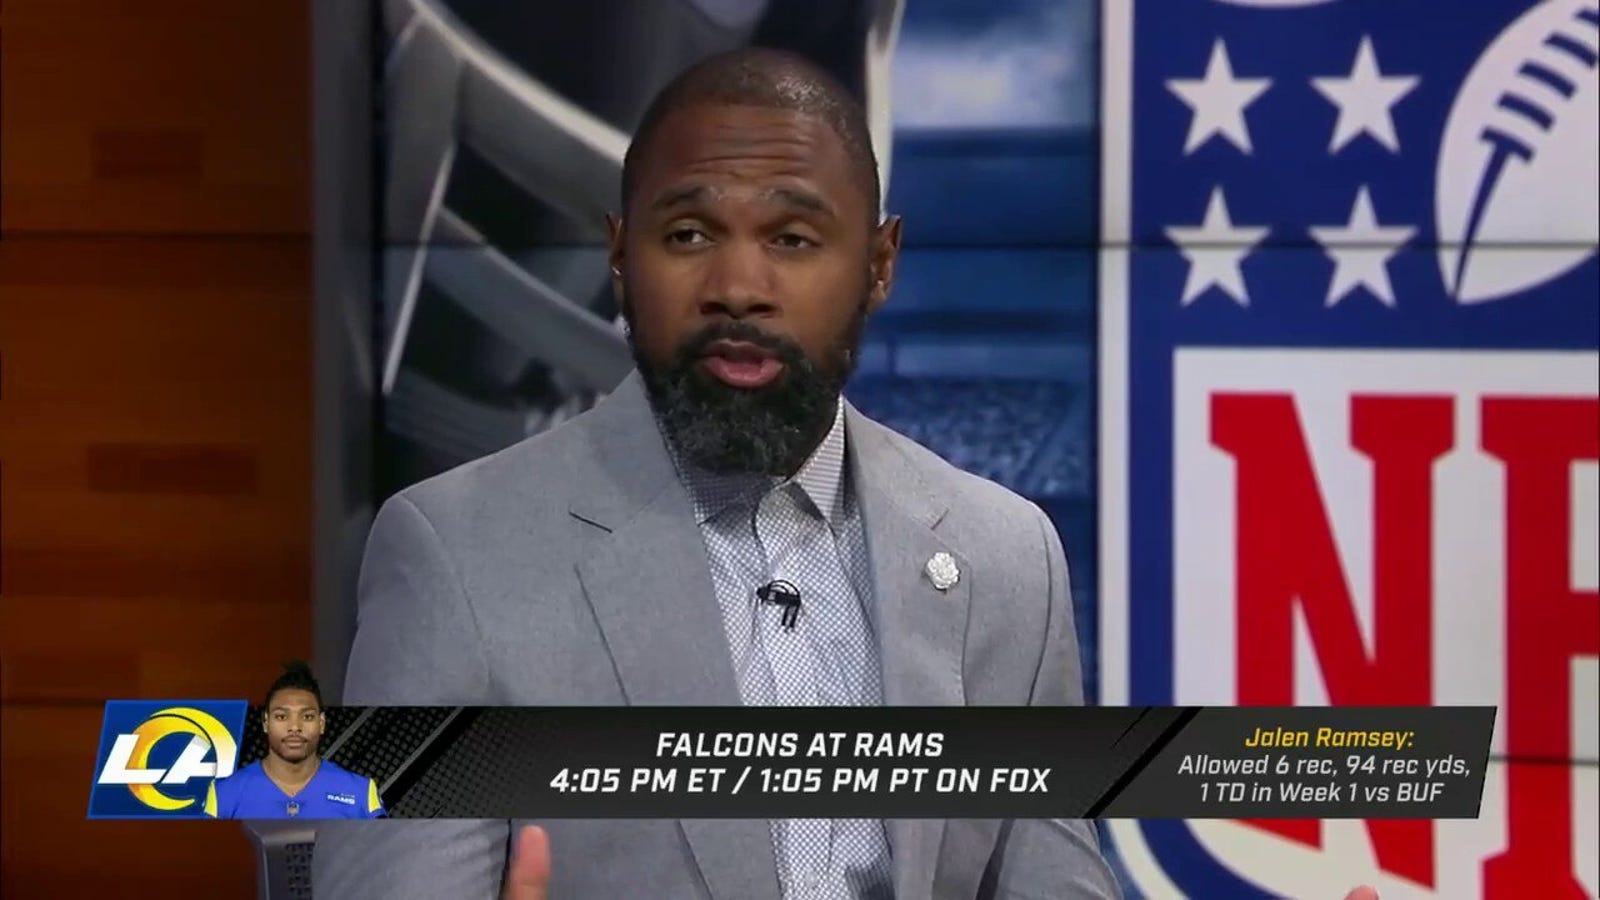 Charles Woodson and the 'Fox NFL Kickoff' crew question Jalen Ramsey's effort in Rams' week 1 matchup